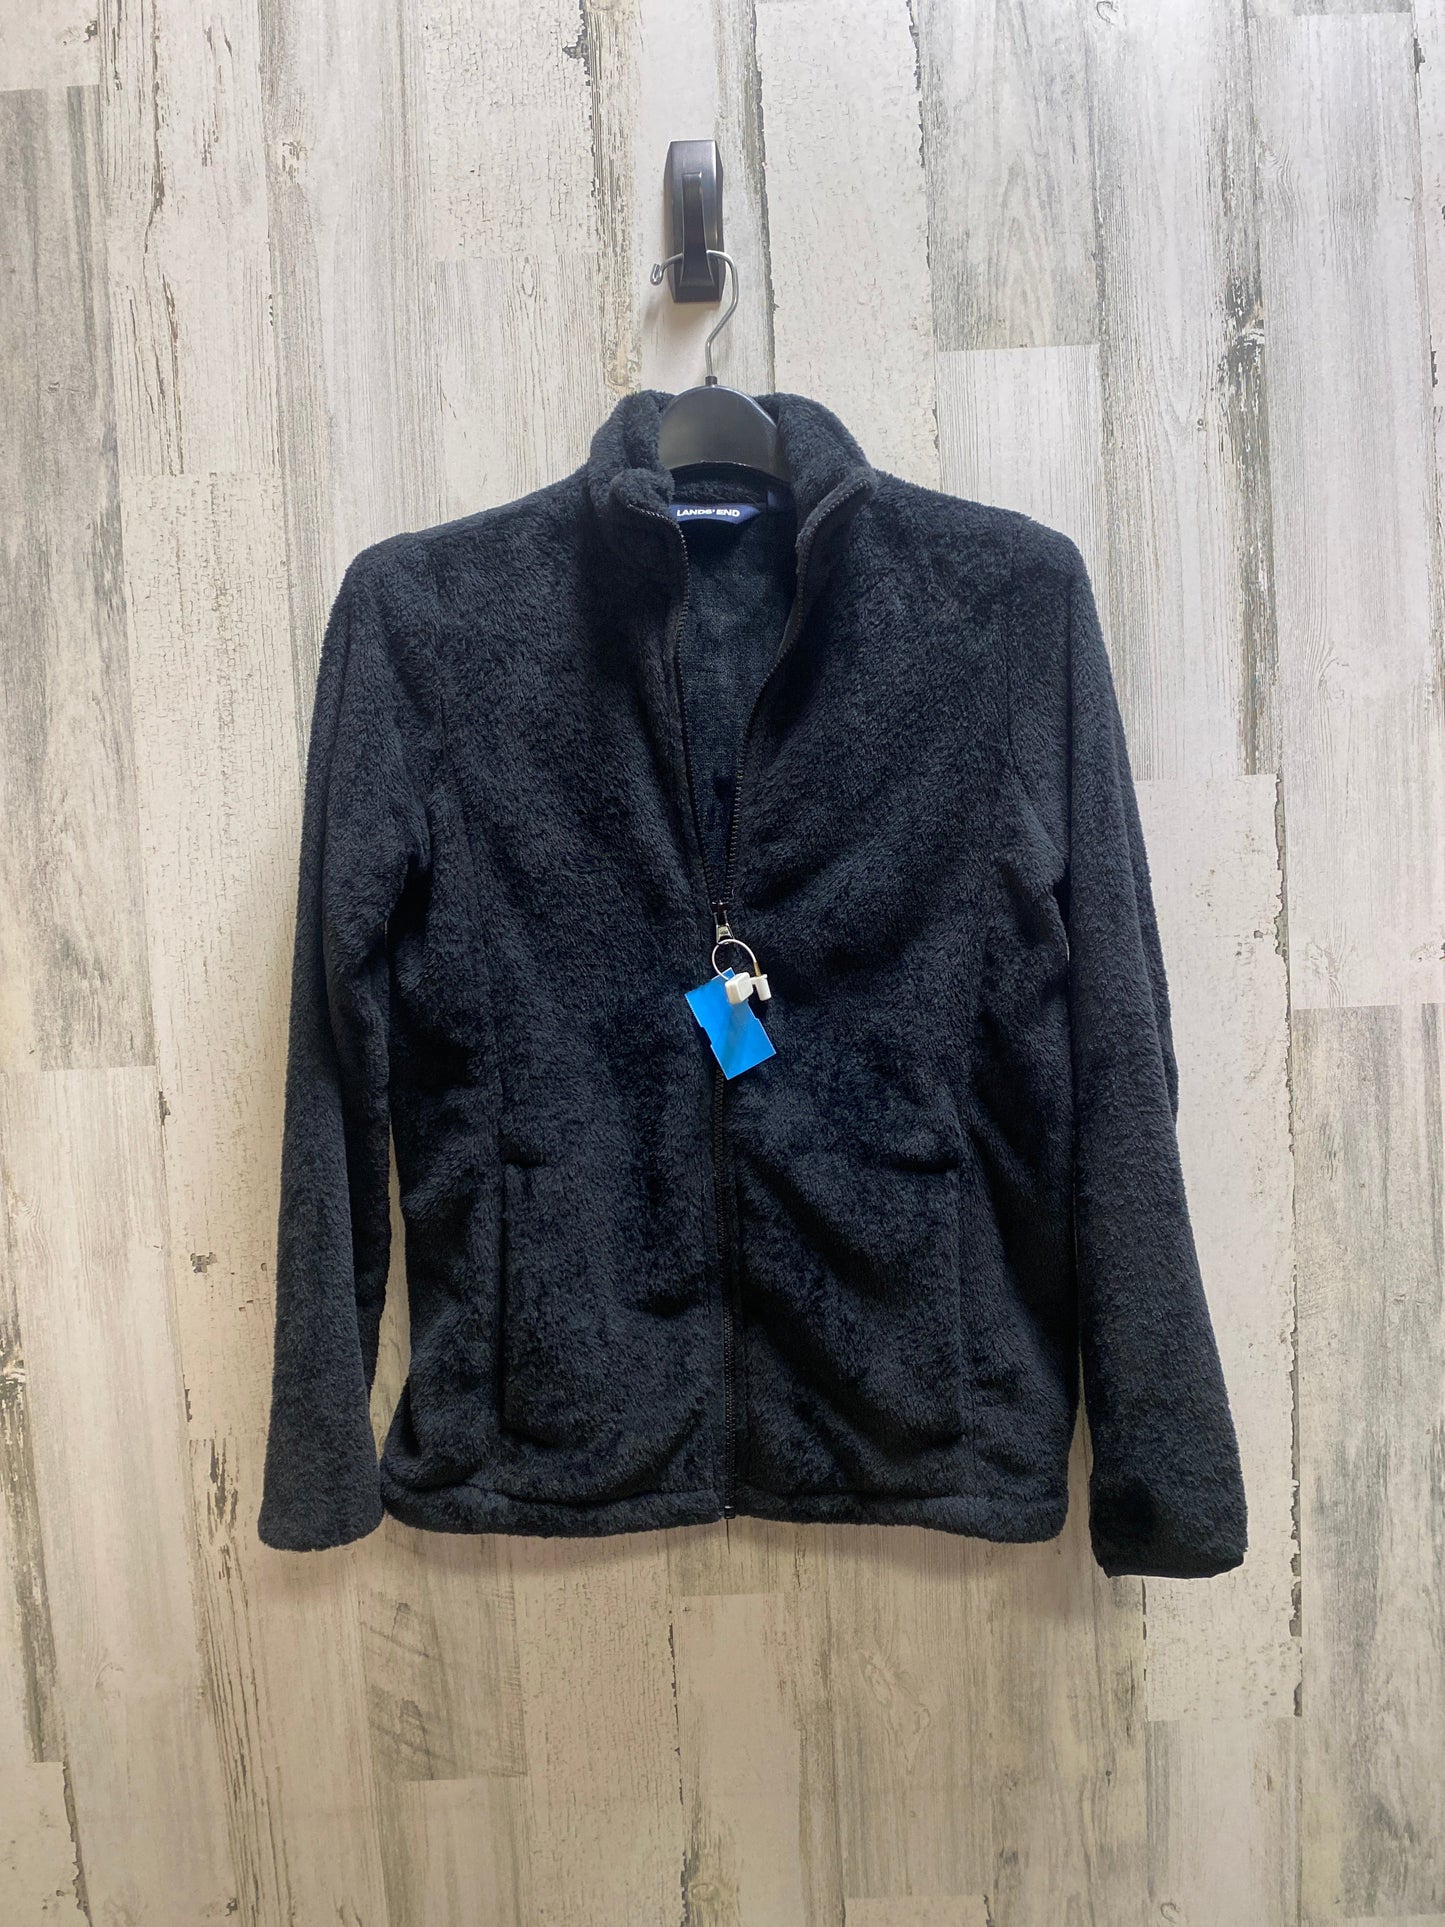 Jacket Other By Lands End  Size: Xs